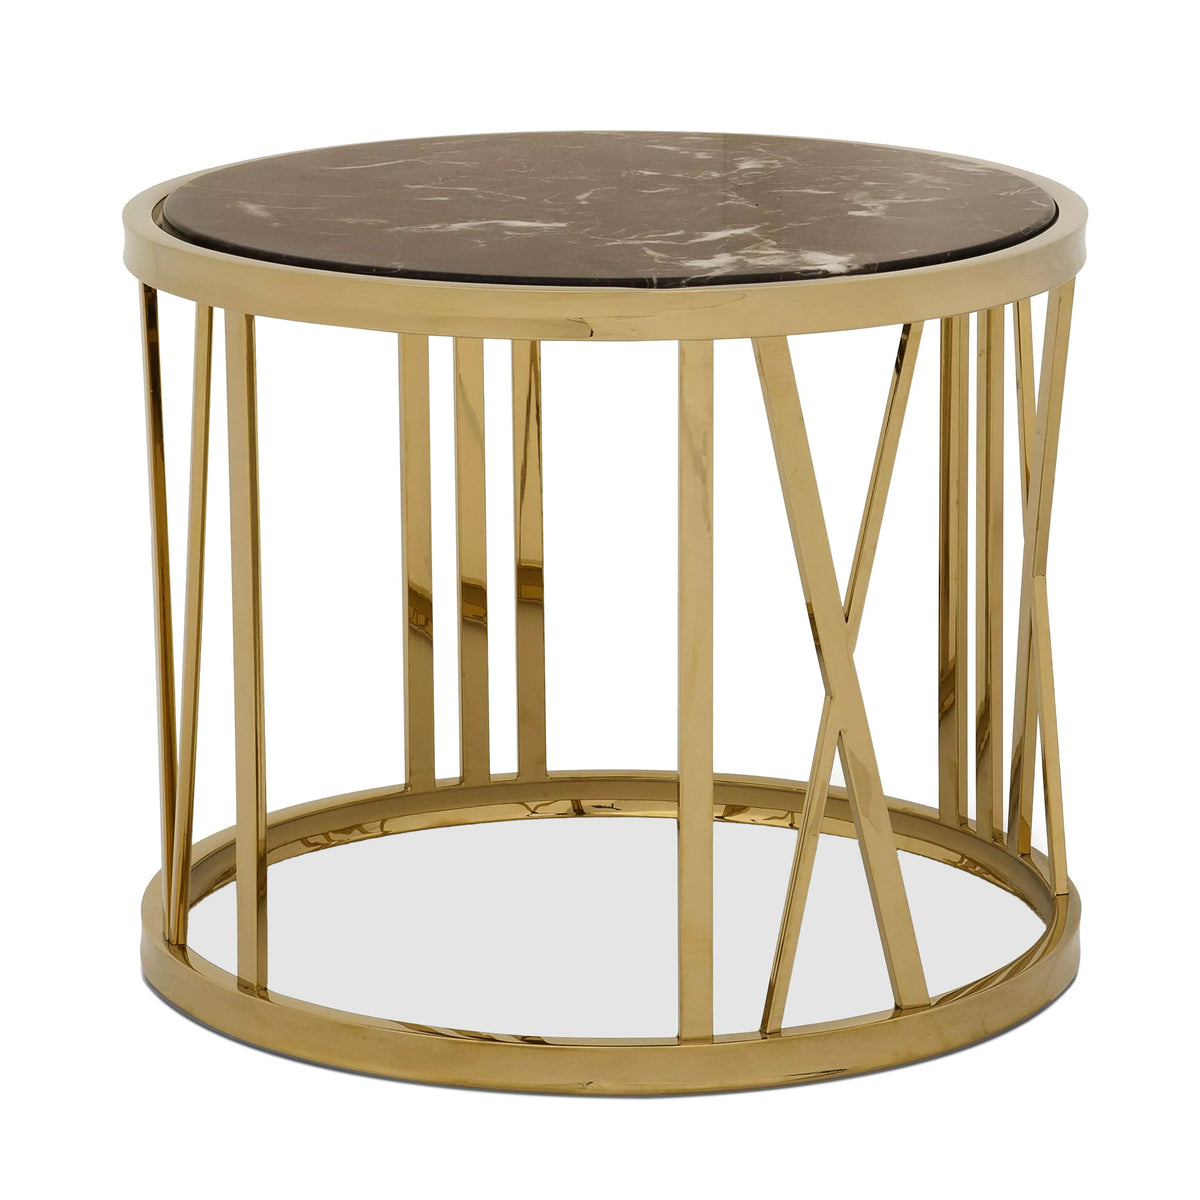 BACCARAT SIDE TABLE